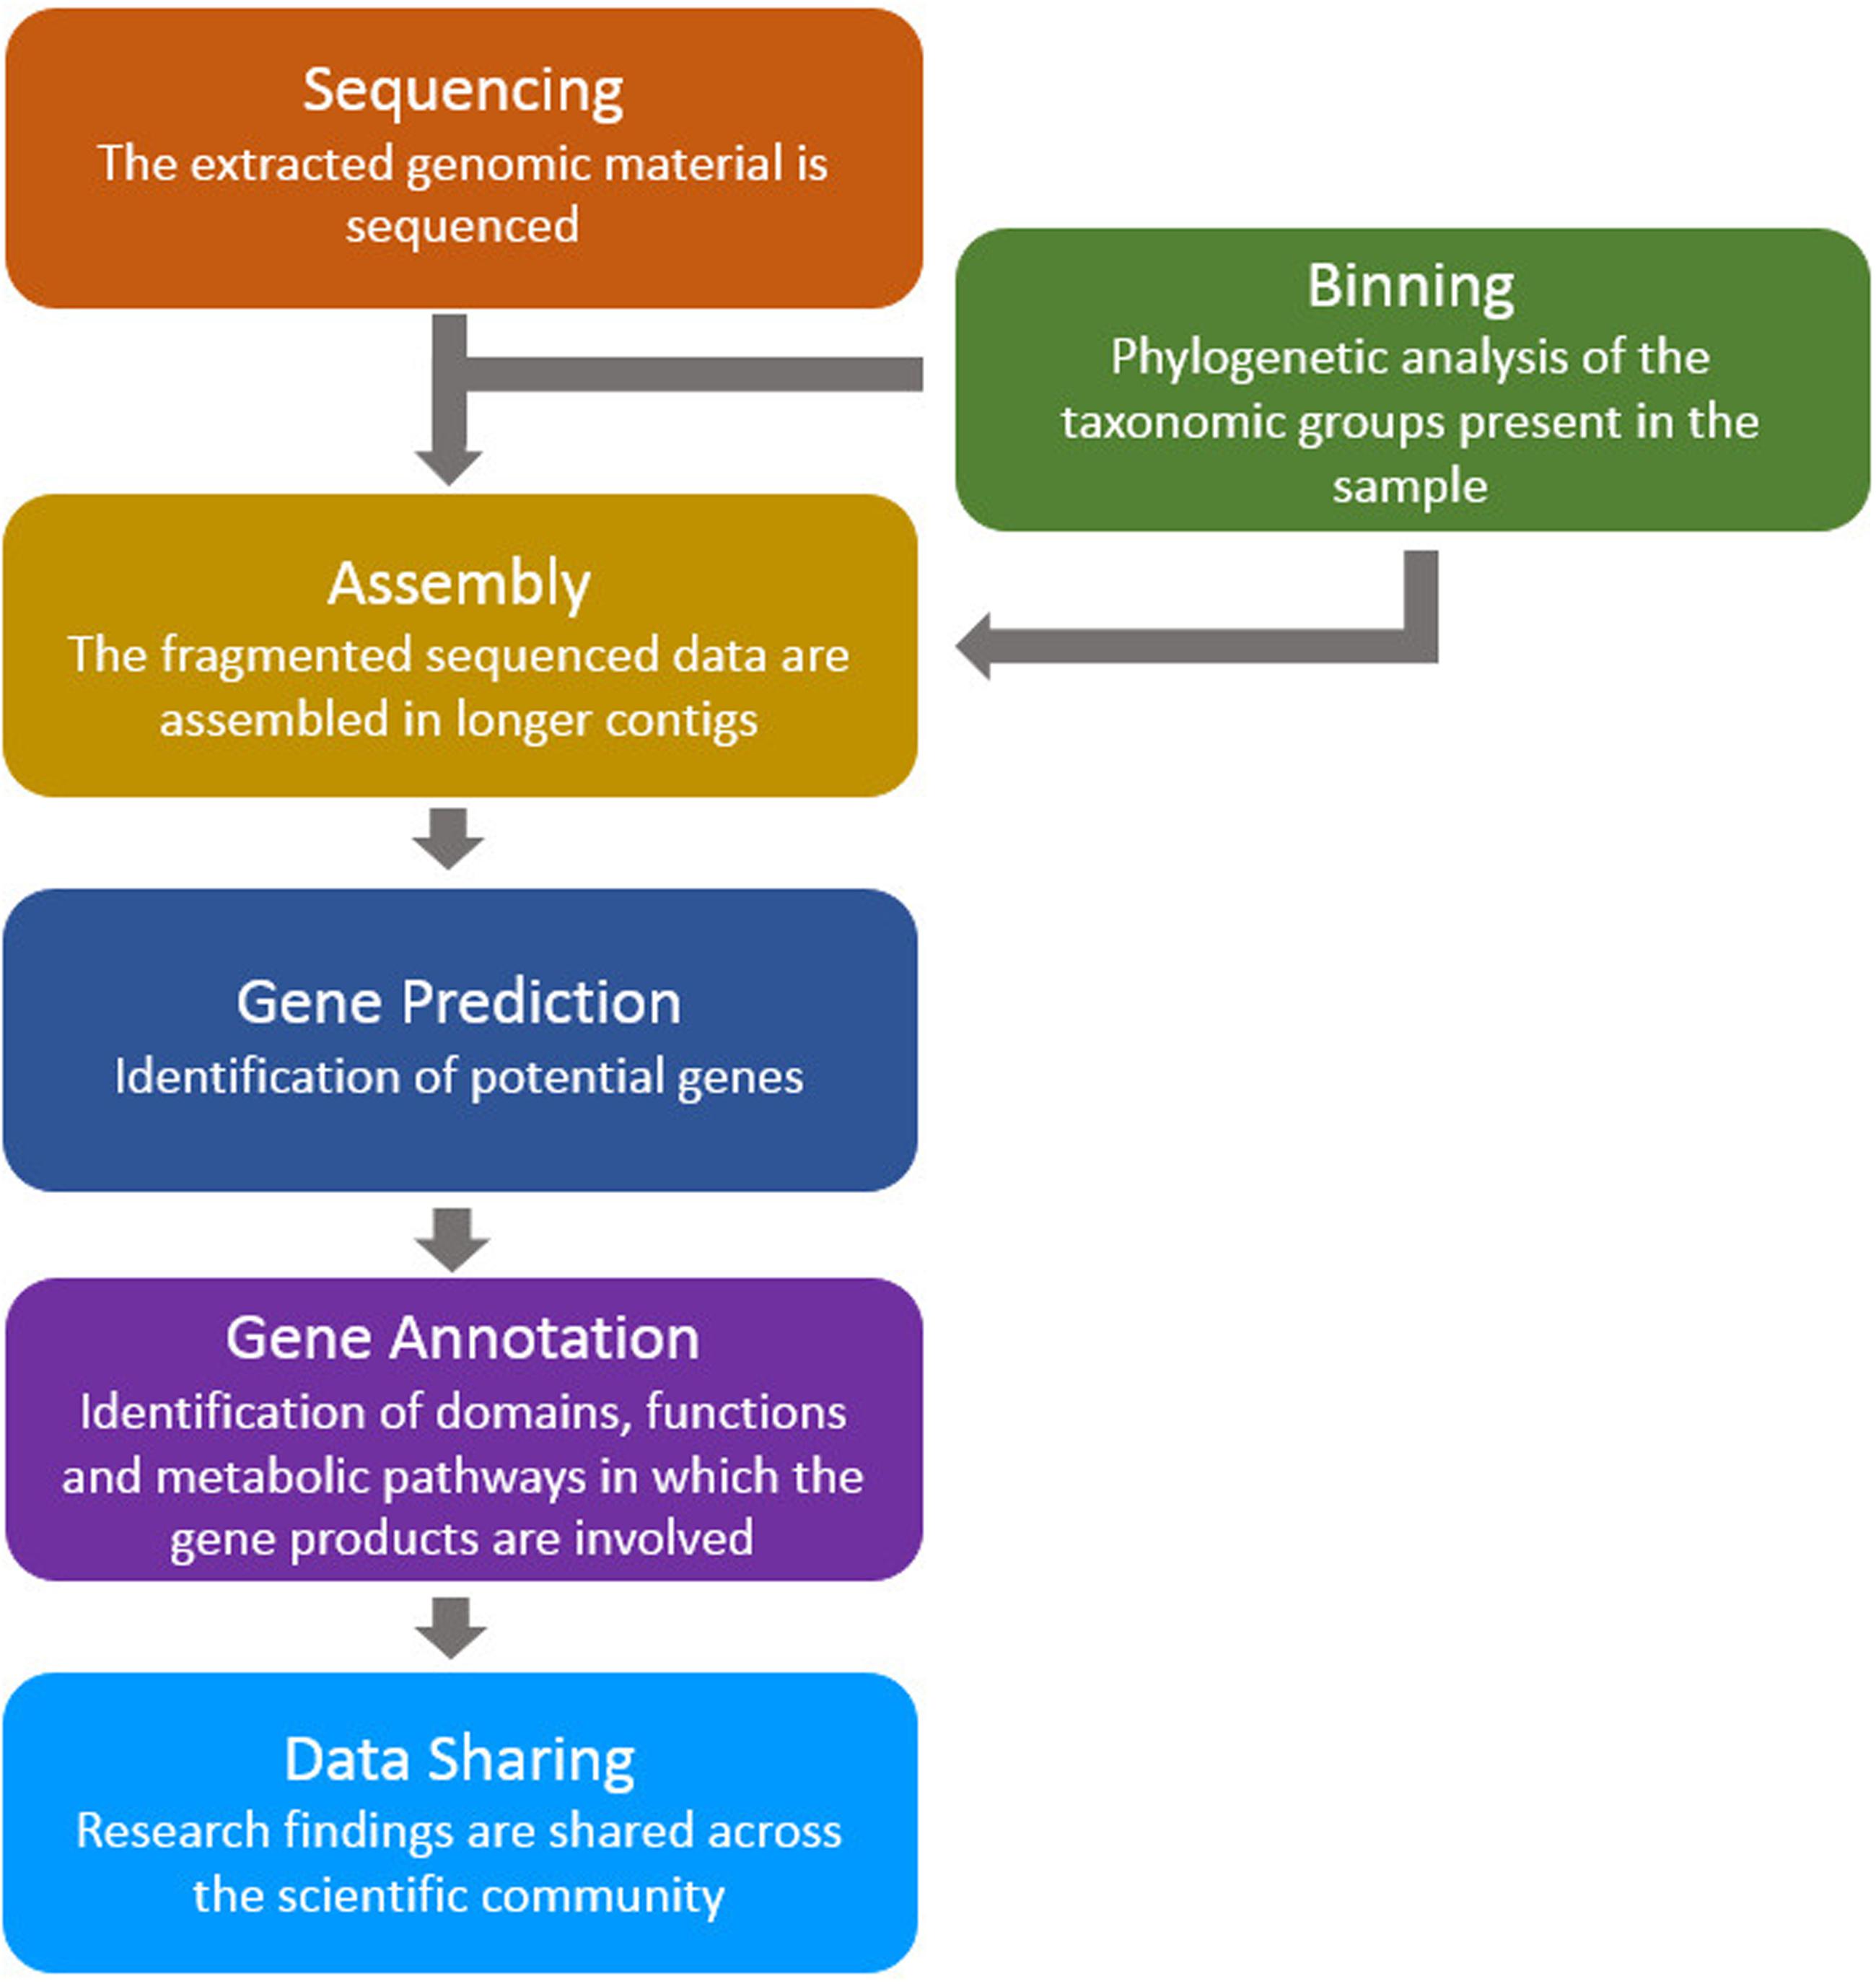 Applications of low coverage sequence data to genomics of species